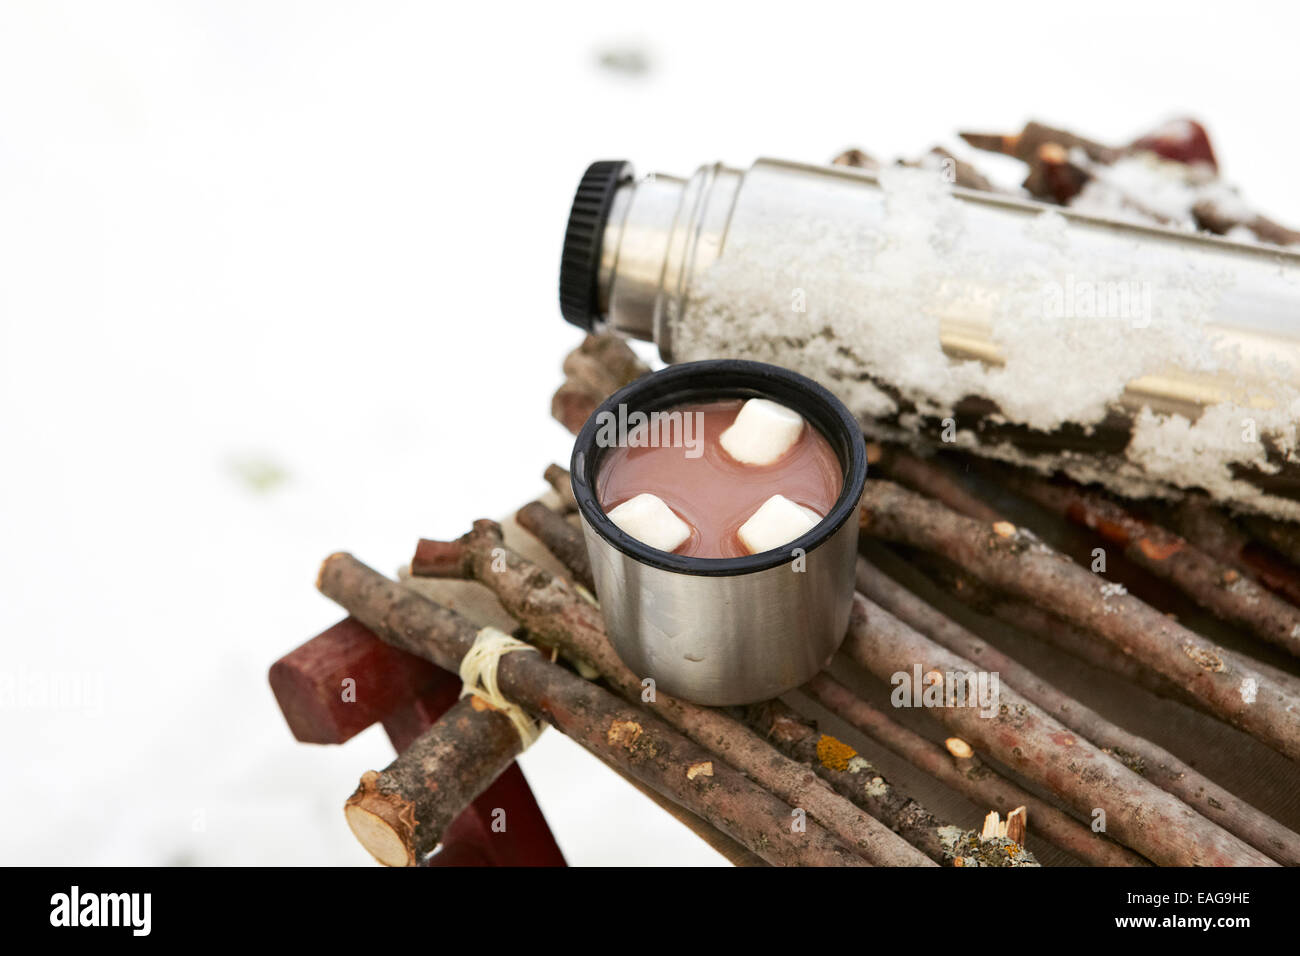 https://c8.alamy.com/comp/EAG9HE/thermos-and-cup-of-hot-chocolate-with-marshmallows-in-winter-setting-EAG9HE.jpg